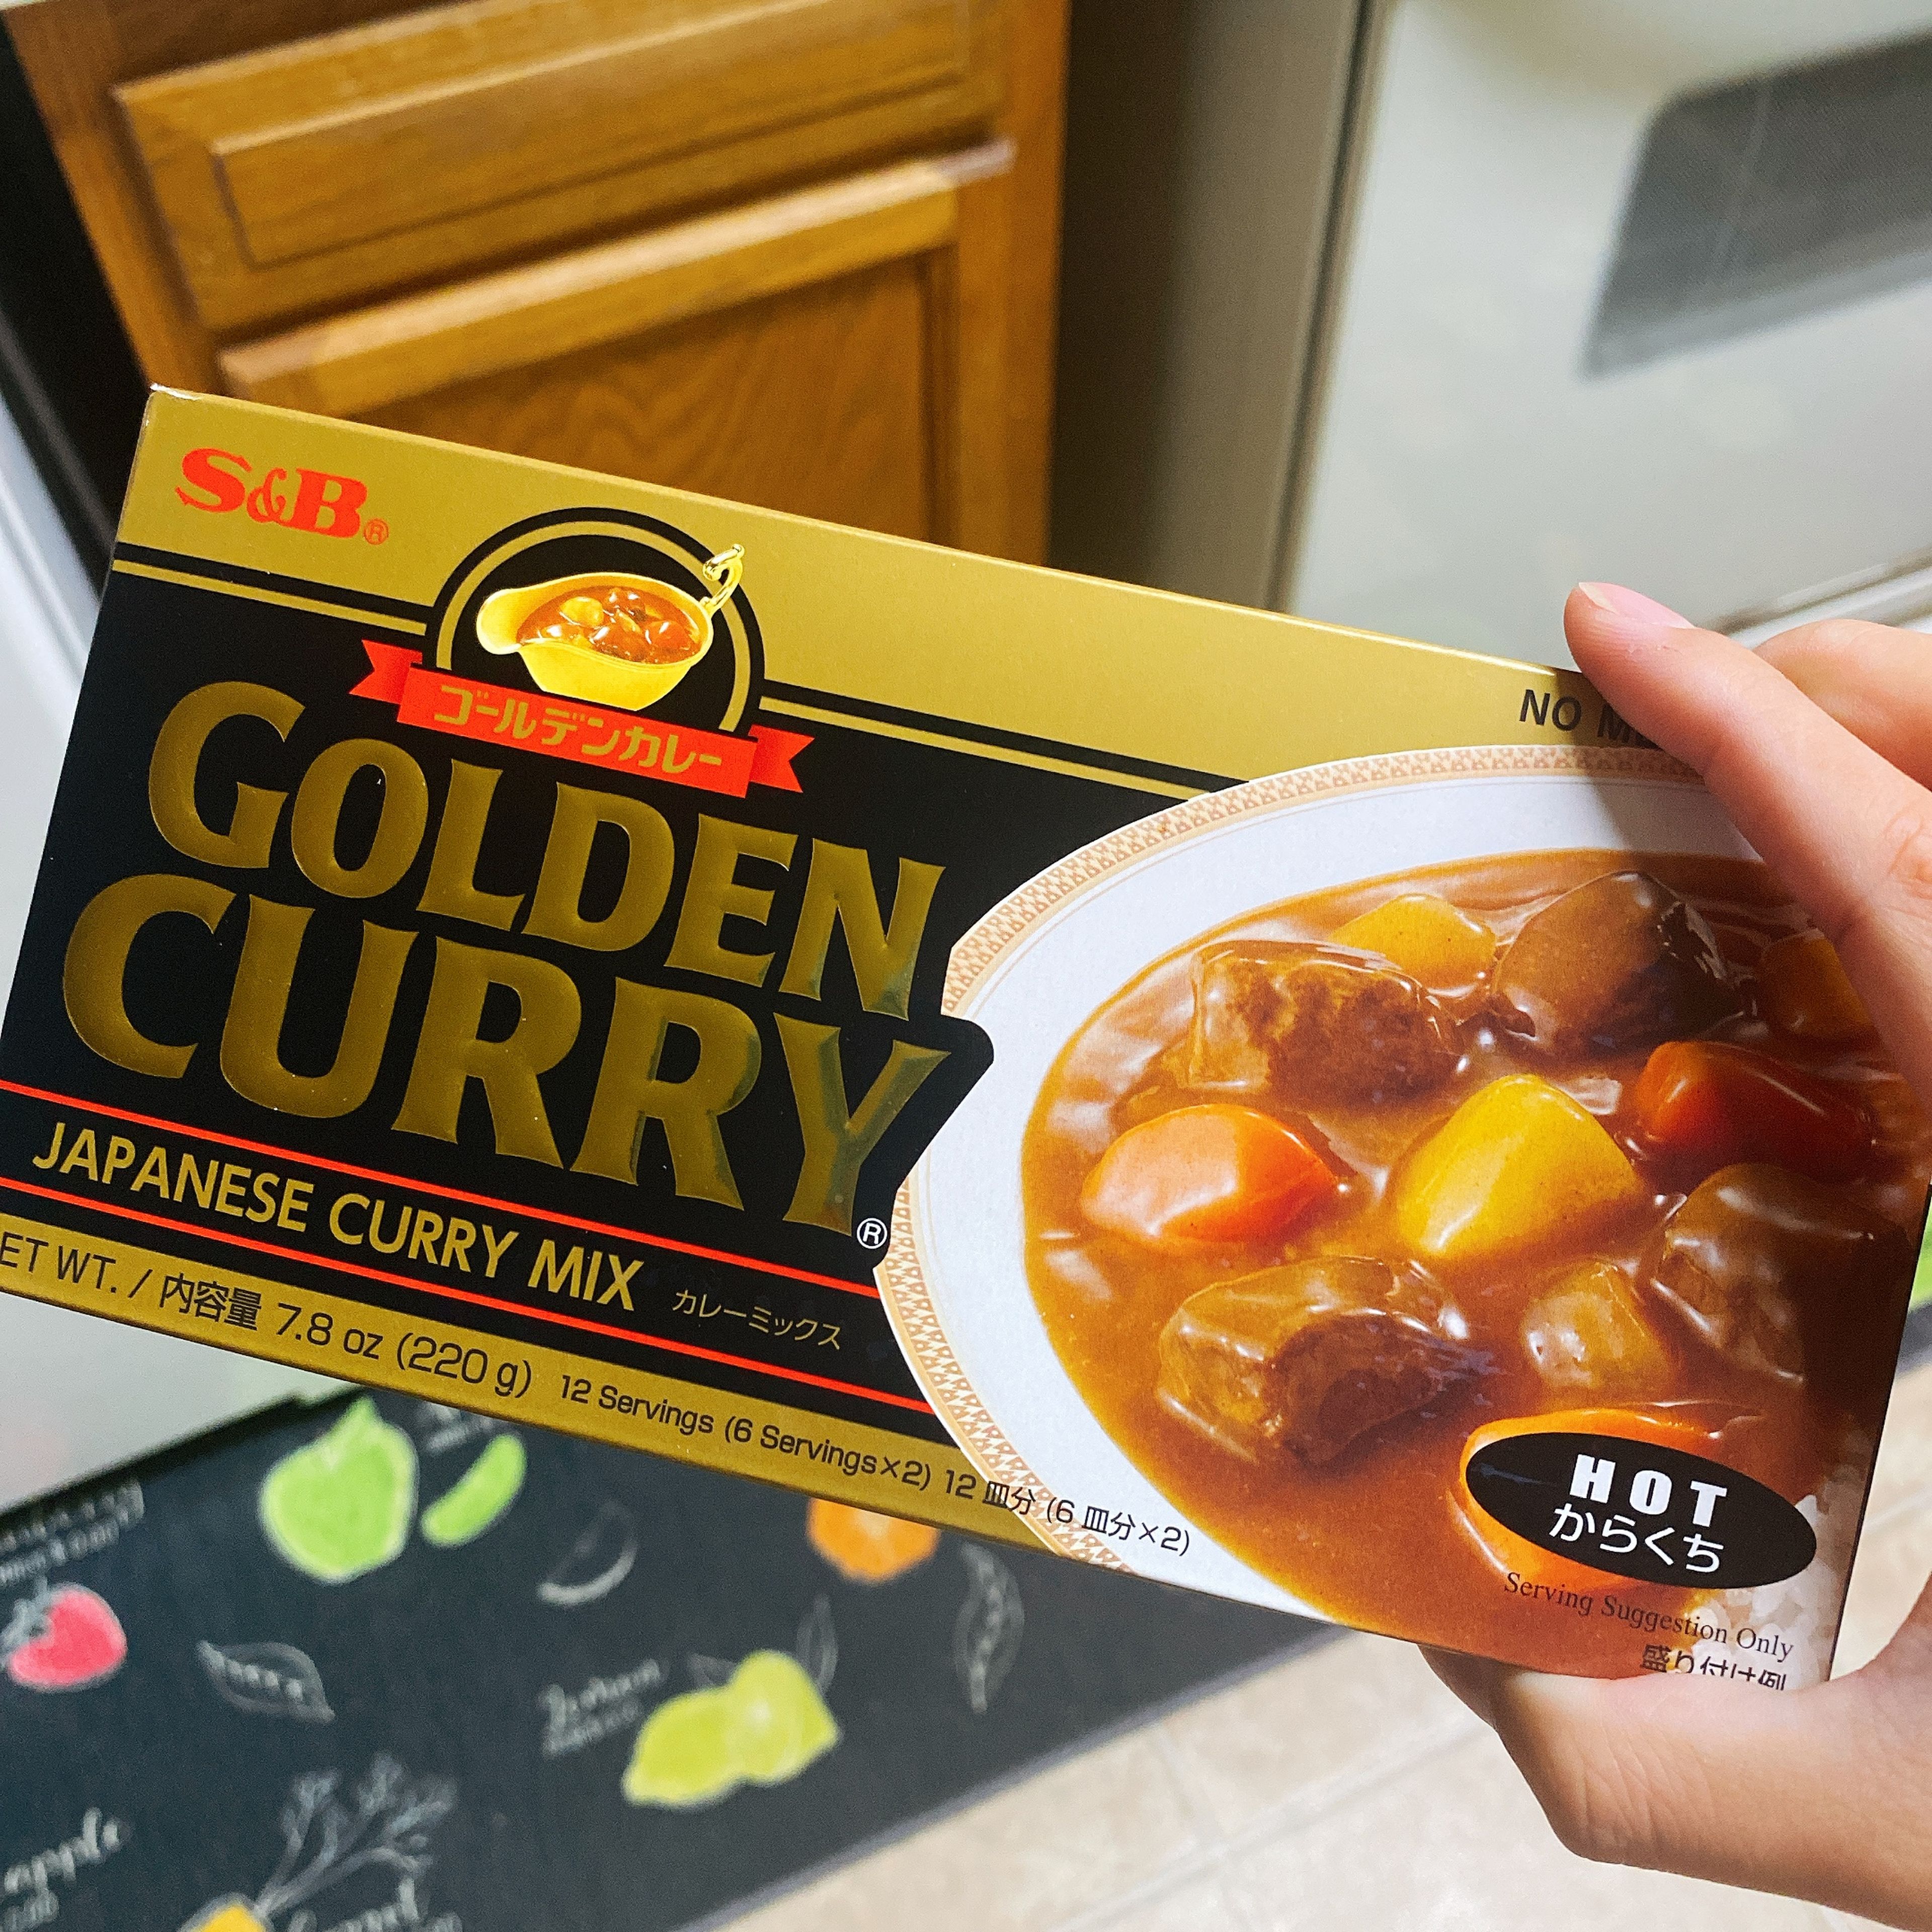 This is the curry I like to use. It comes with 8 little cubes and I tend to use 4 at a time. It’s not hot actually, but you can buy mild instead just in case. Chicken can also be replaced by beef to make curry beef.